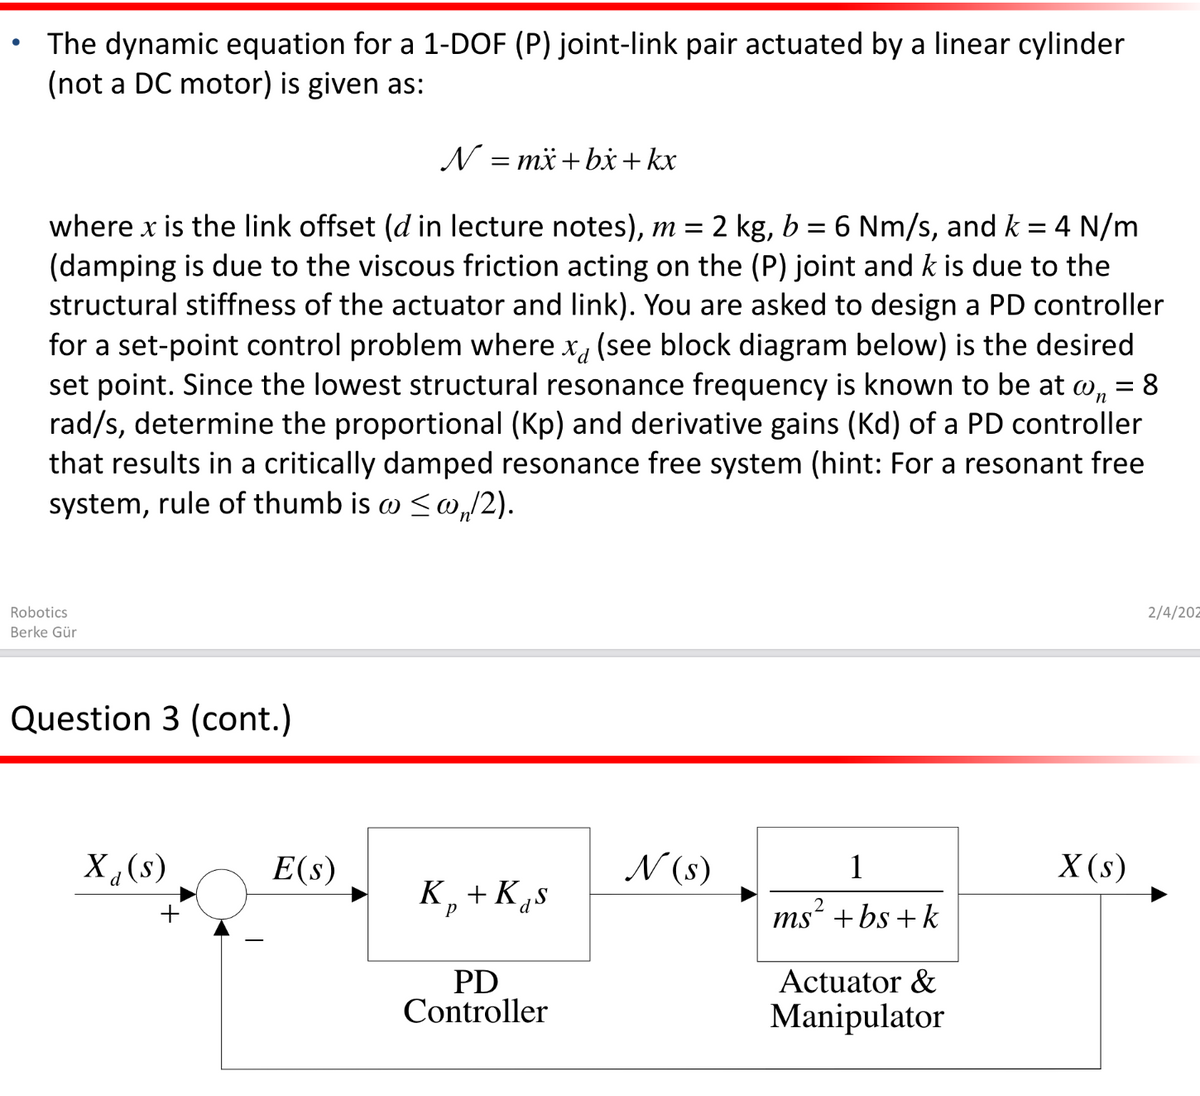 The dynamic equation for a 1-DOF (P) joint-link pair actuated by a linear cylinder
(not a DC motor) is given as:
N = mä +bx+ kx
where x is the link offset (d in lecture notes), m = 2 kg, b
(damping is due to the viscous friction acting on the (P) joint and k is due to the
structural stiffness of the actuator and link). You are asked to design a PD controller
for a set-point control problem where x, (see block diagram below) is the desired
set point. Since the lowest structural resonance frequency is known to be at w, = 8
rad/s, determine the proportional (Kp) and derivative gains (Kd) of a PD controller
that results in a critically damped resonance free system (hint: For a resonant free
system, rule of thumb is w <w,/2).
= 6 Nm/s, and k
4 N/m
Robotics
2/4/202
Berke Gür
Question 3 (cont.)
(8)’X
E(s)
N (s)
1
X (s)
K,+K„s
ms“ + bs + k
Actuator &
PD
Controller
Manipulator
